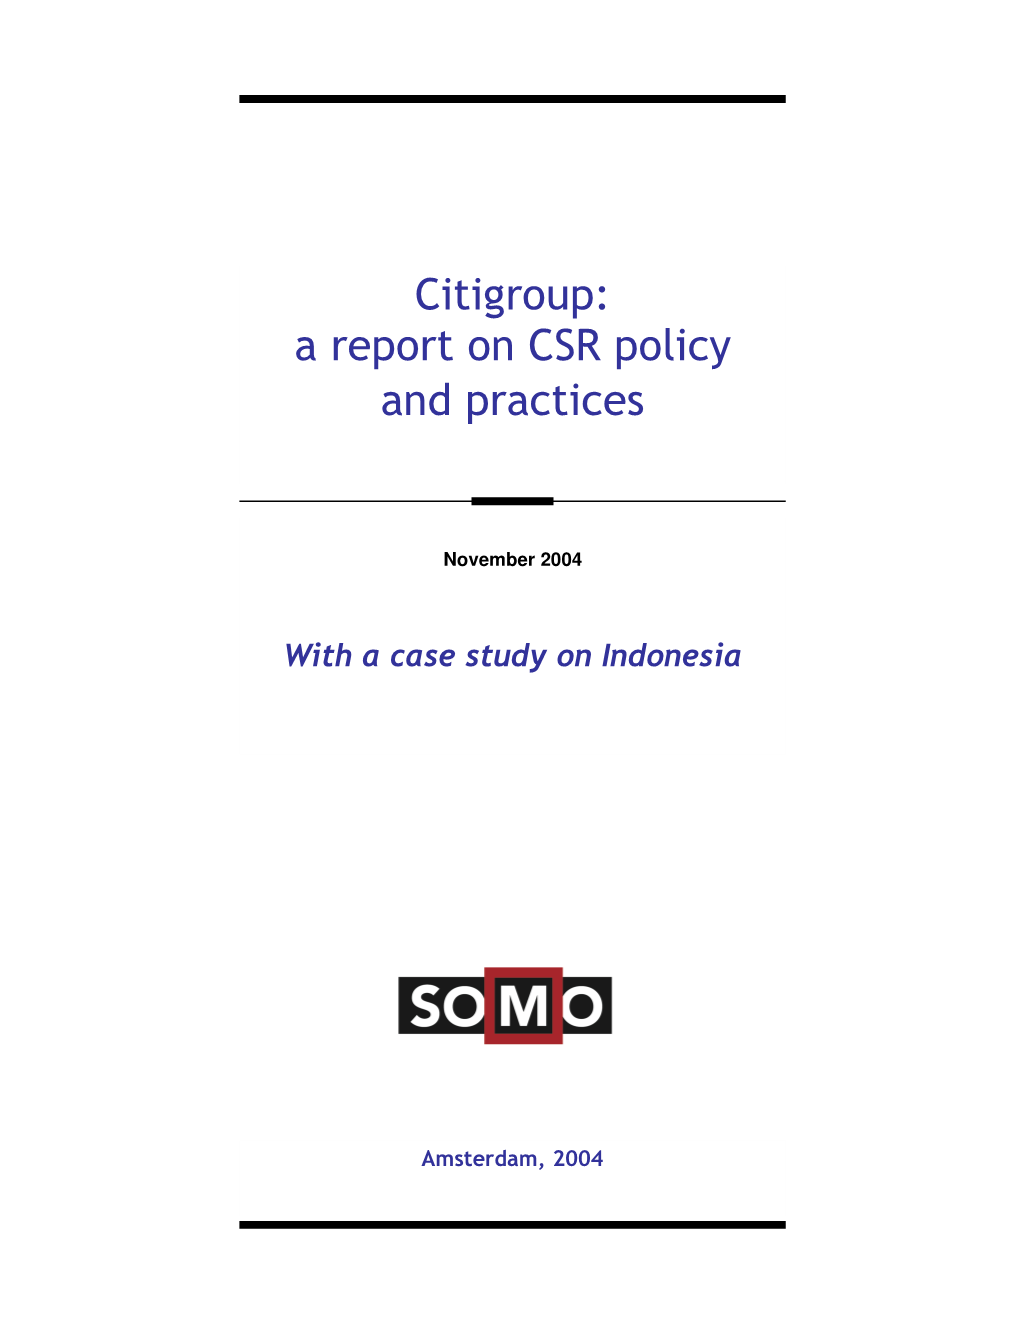 Citigroup: a Report on CSR Policy and Practices